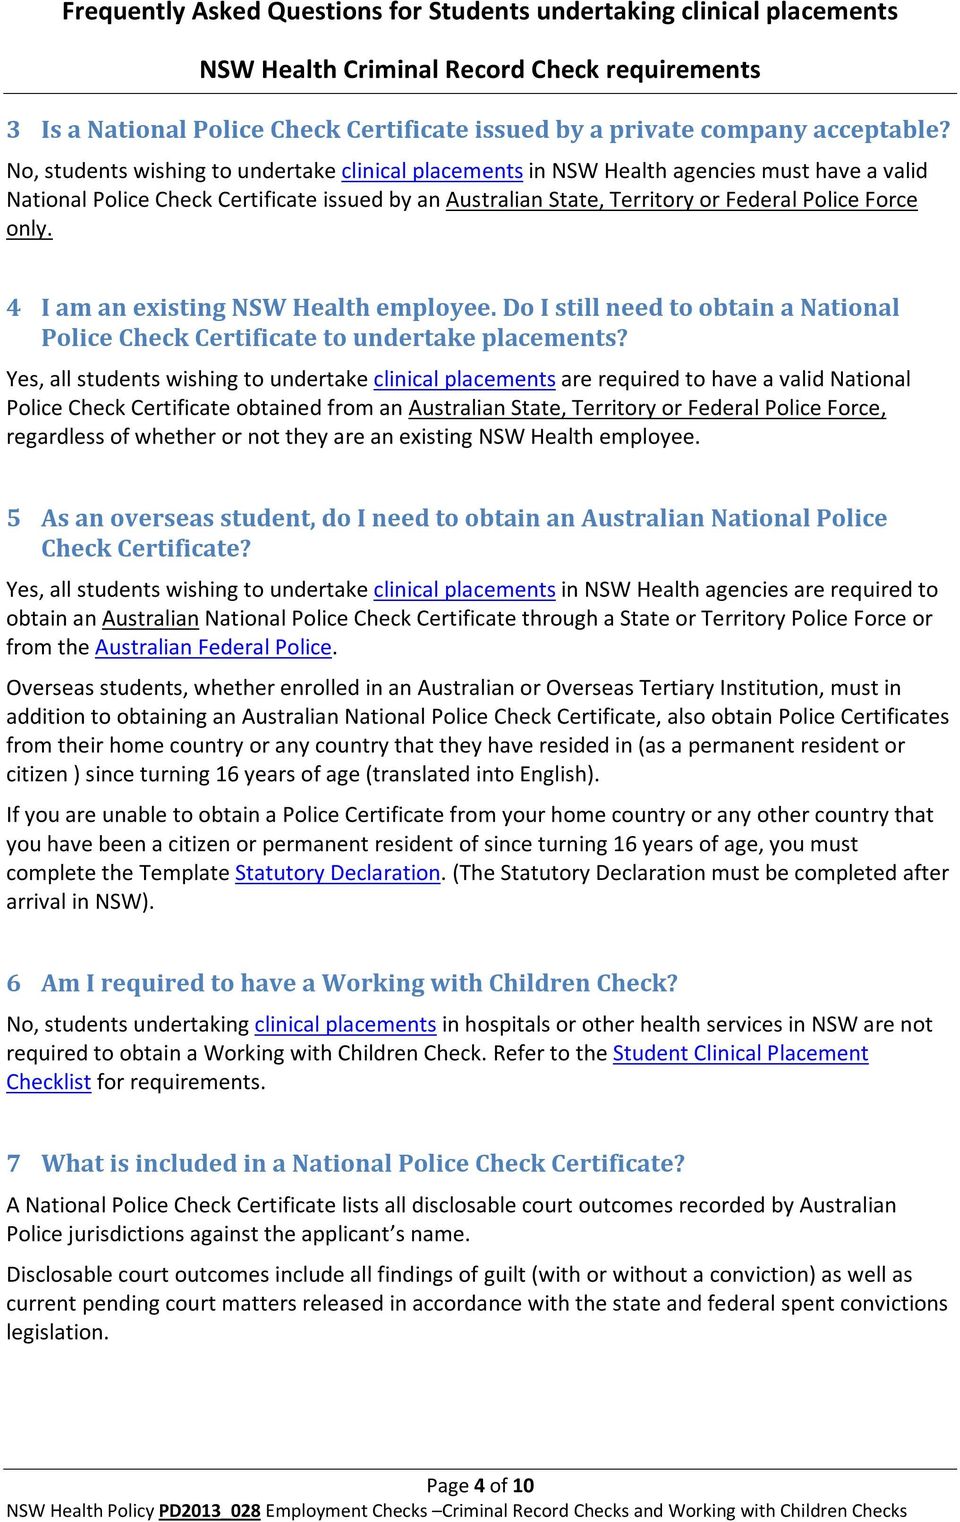 4 I am an existing NSW Health employee. Do I still need to obtain a National Police Check Certificate to undertake placements?